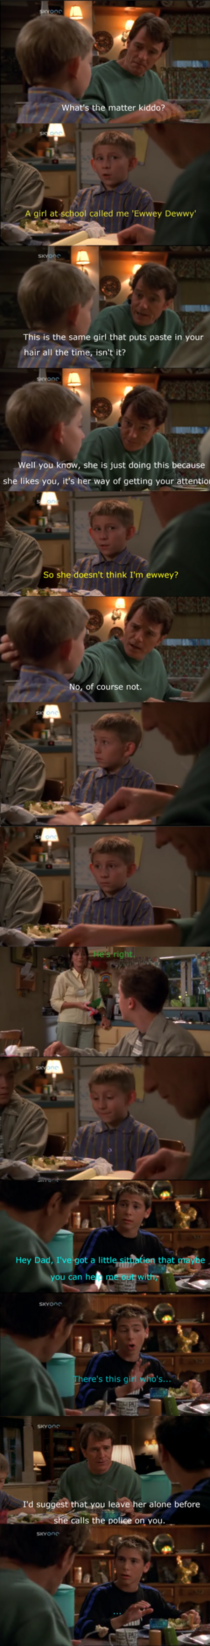 A different Malcolm in the middle scene that I enjoyed